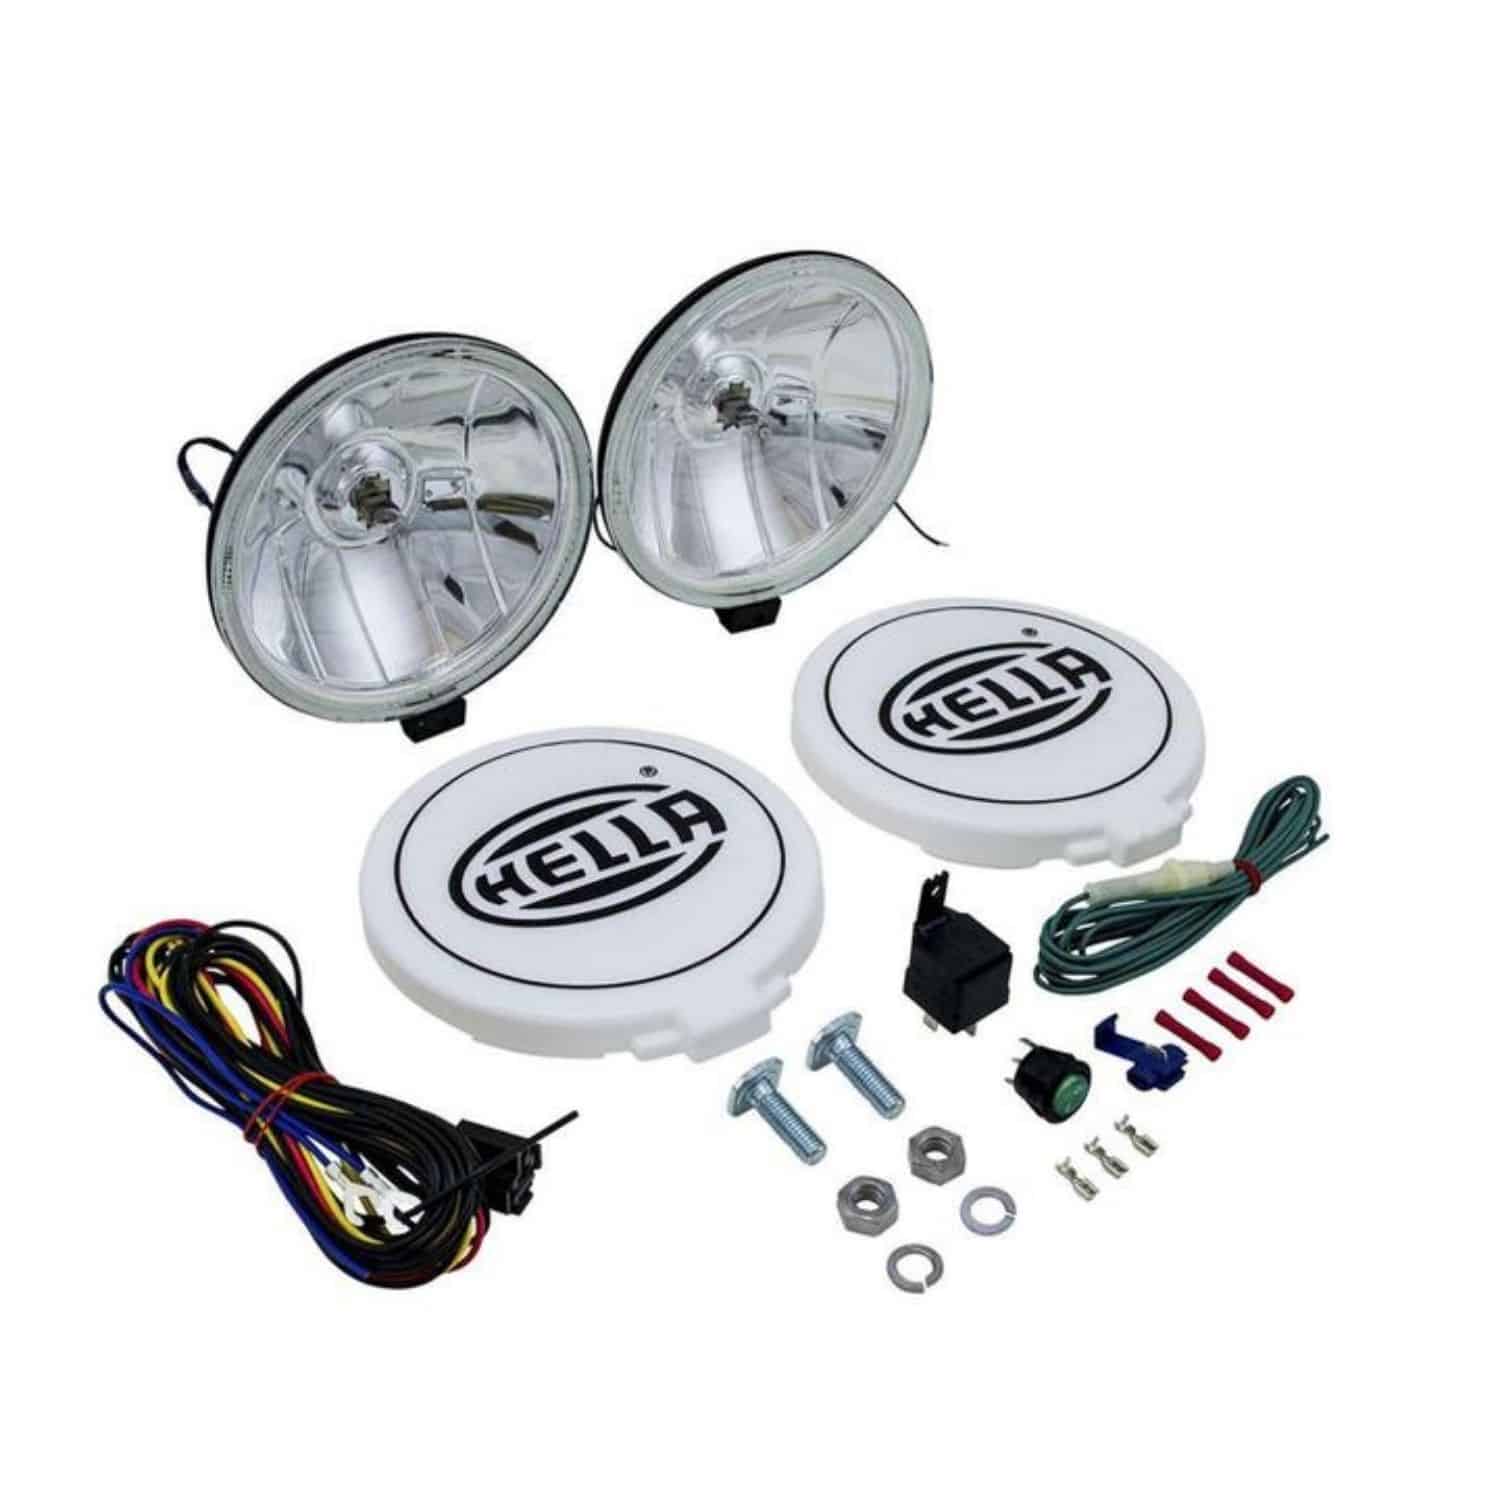 HELLA Comet 500 Driving Lamp Set (Kit with 2 x Halogen Lamps